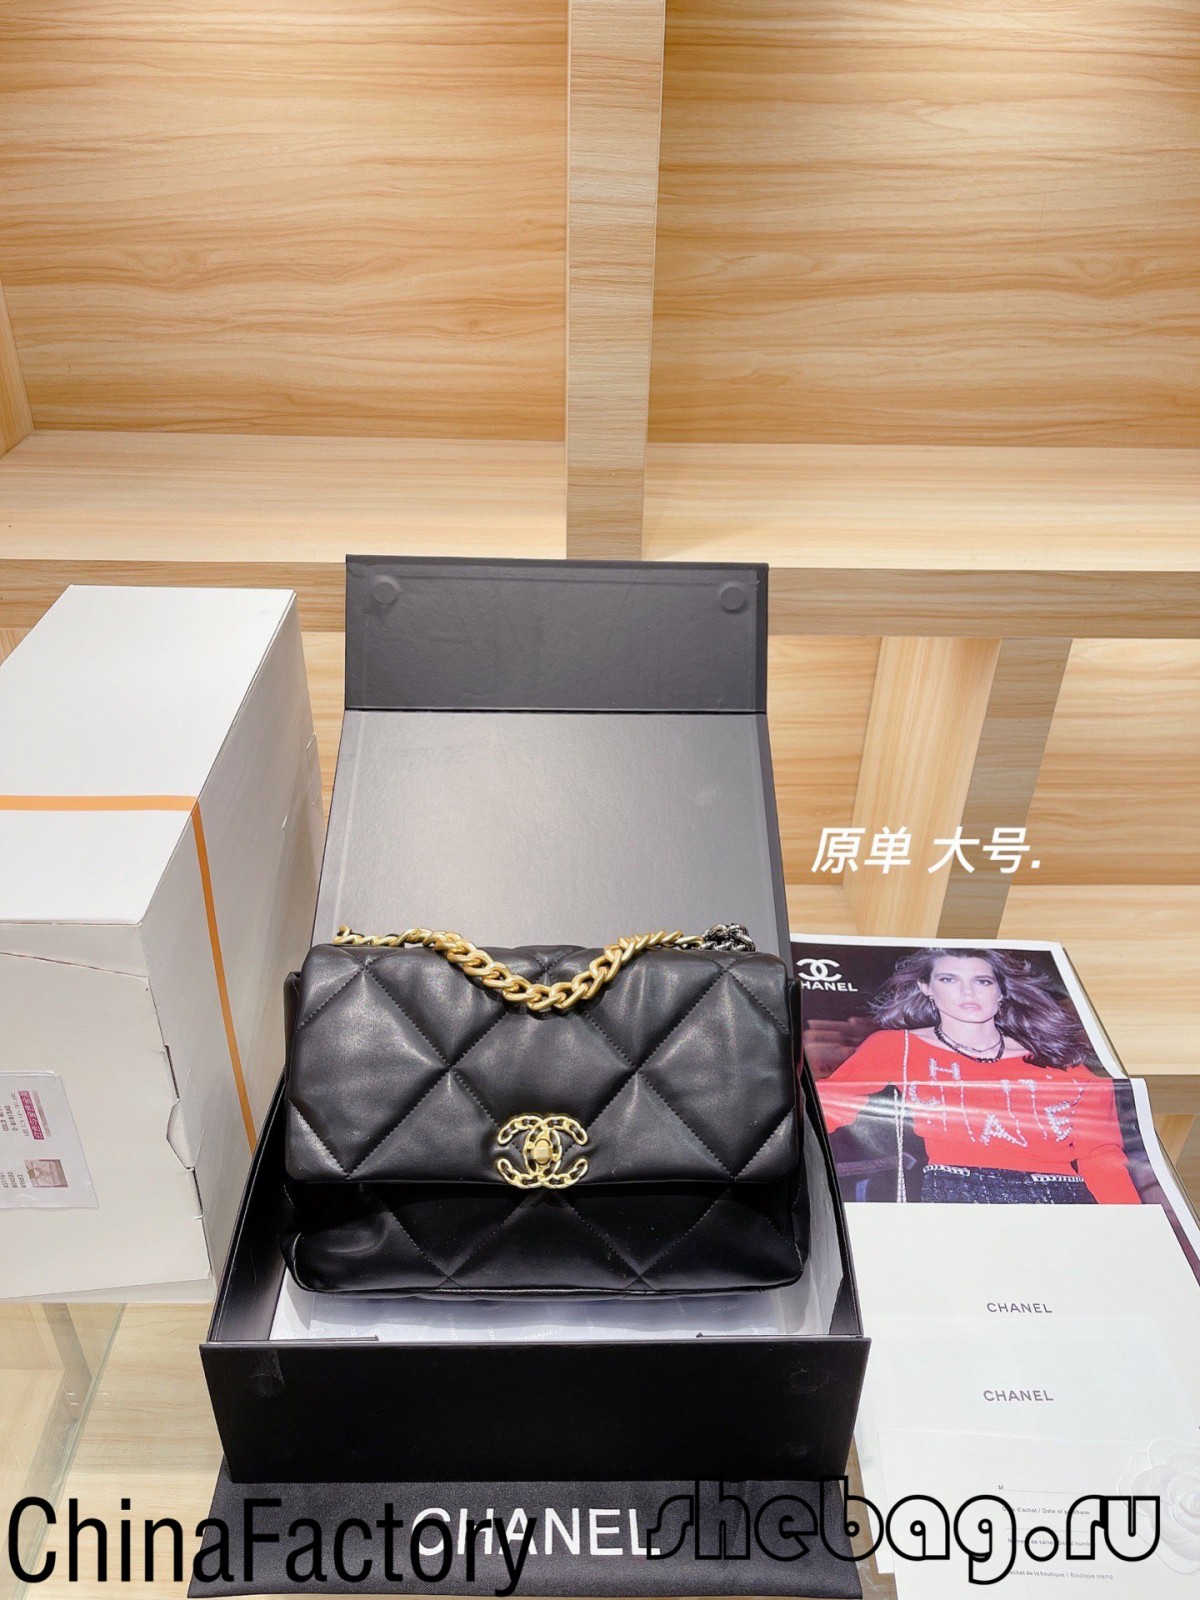 Aaa Chanel bag replica: Chanel 19 replica bag review (Updated in 2022)-Best Quality Fake designer Bag Review, Replica designer bag ru